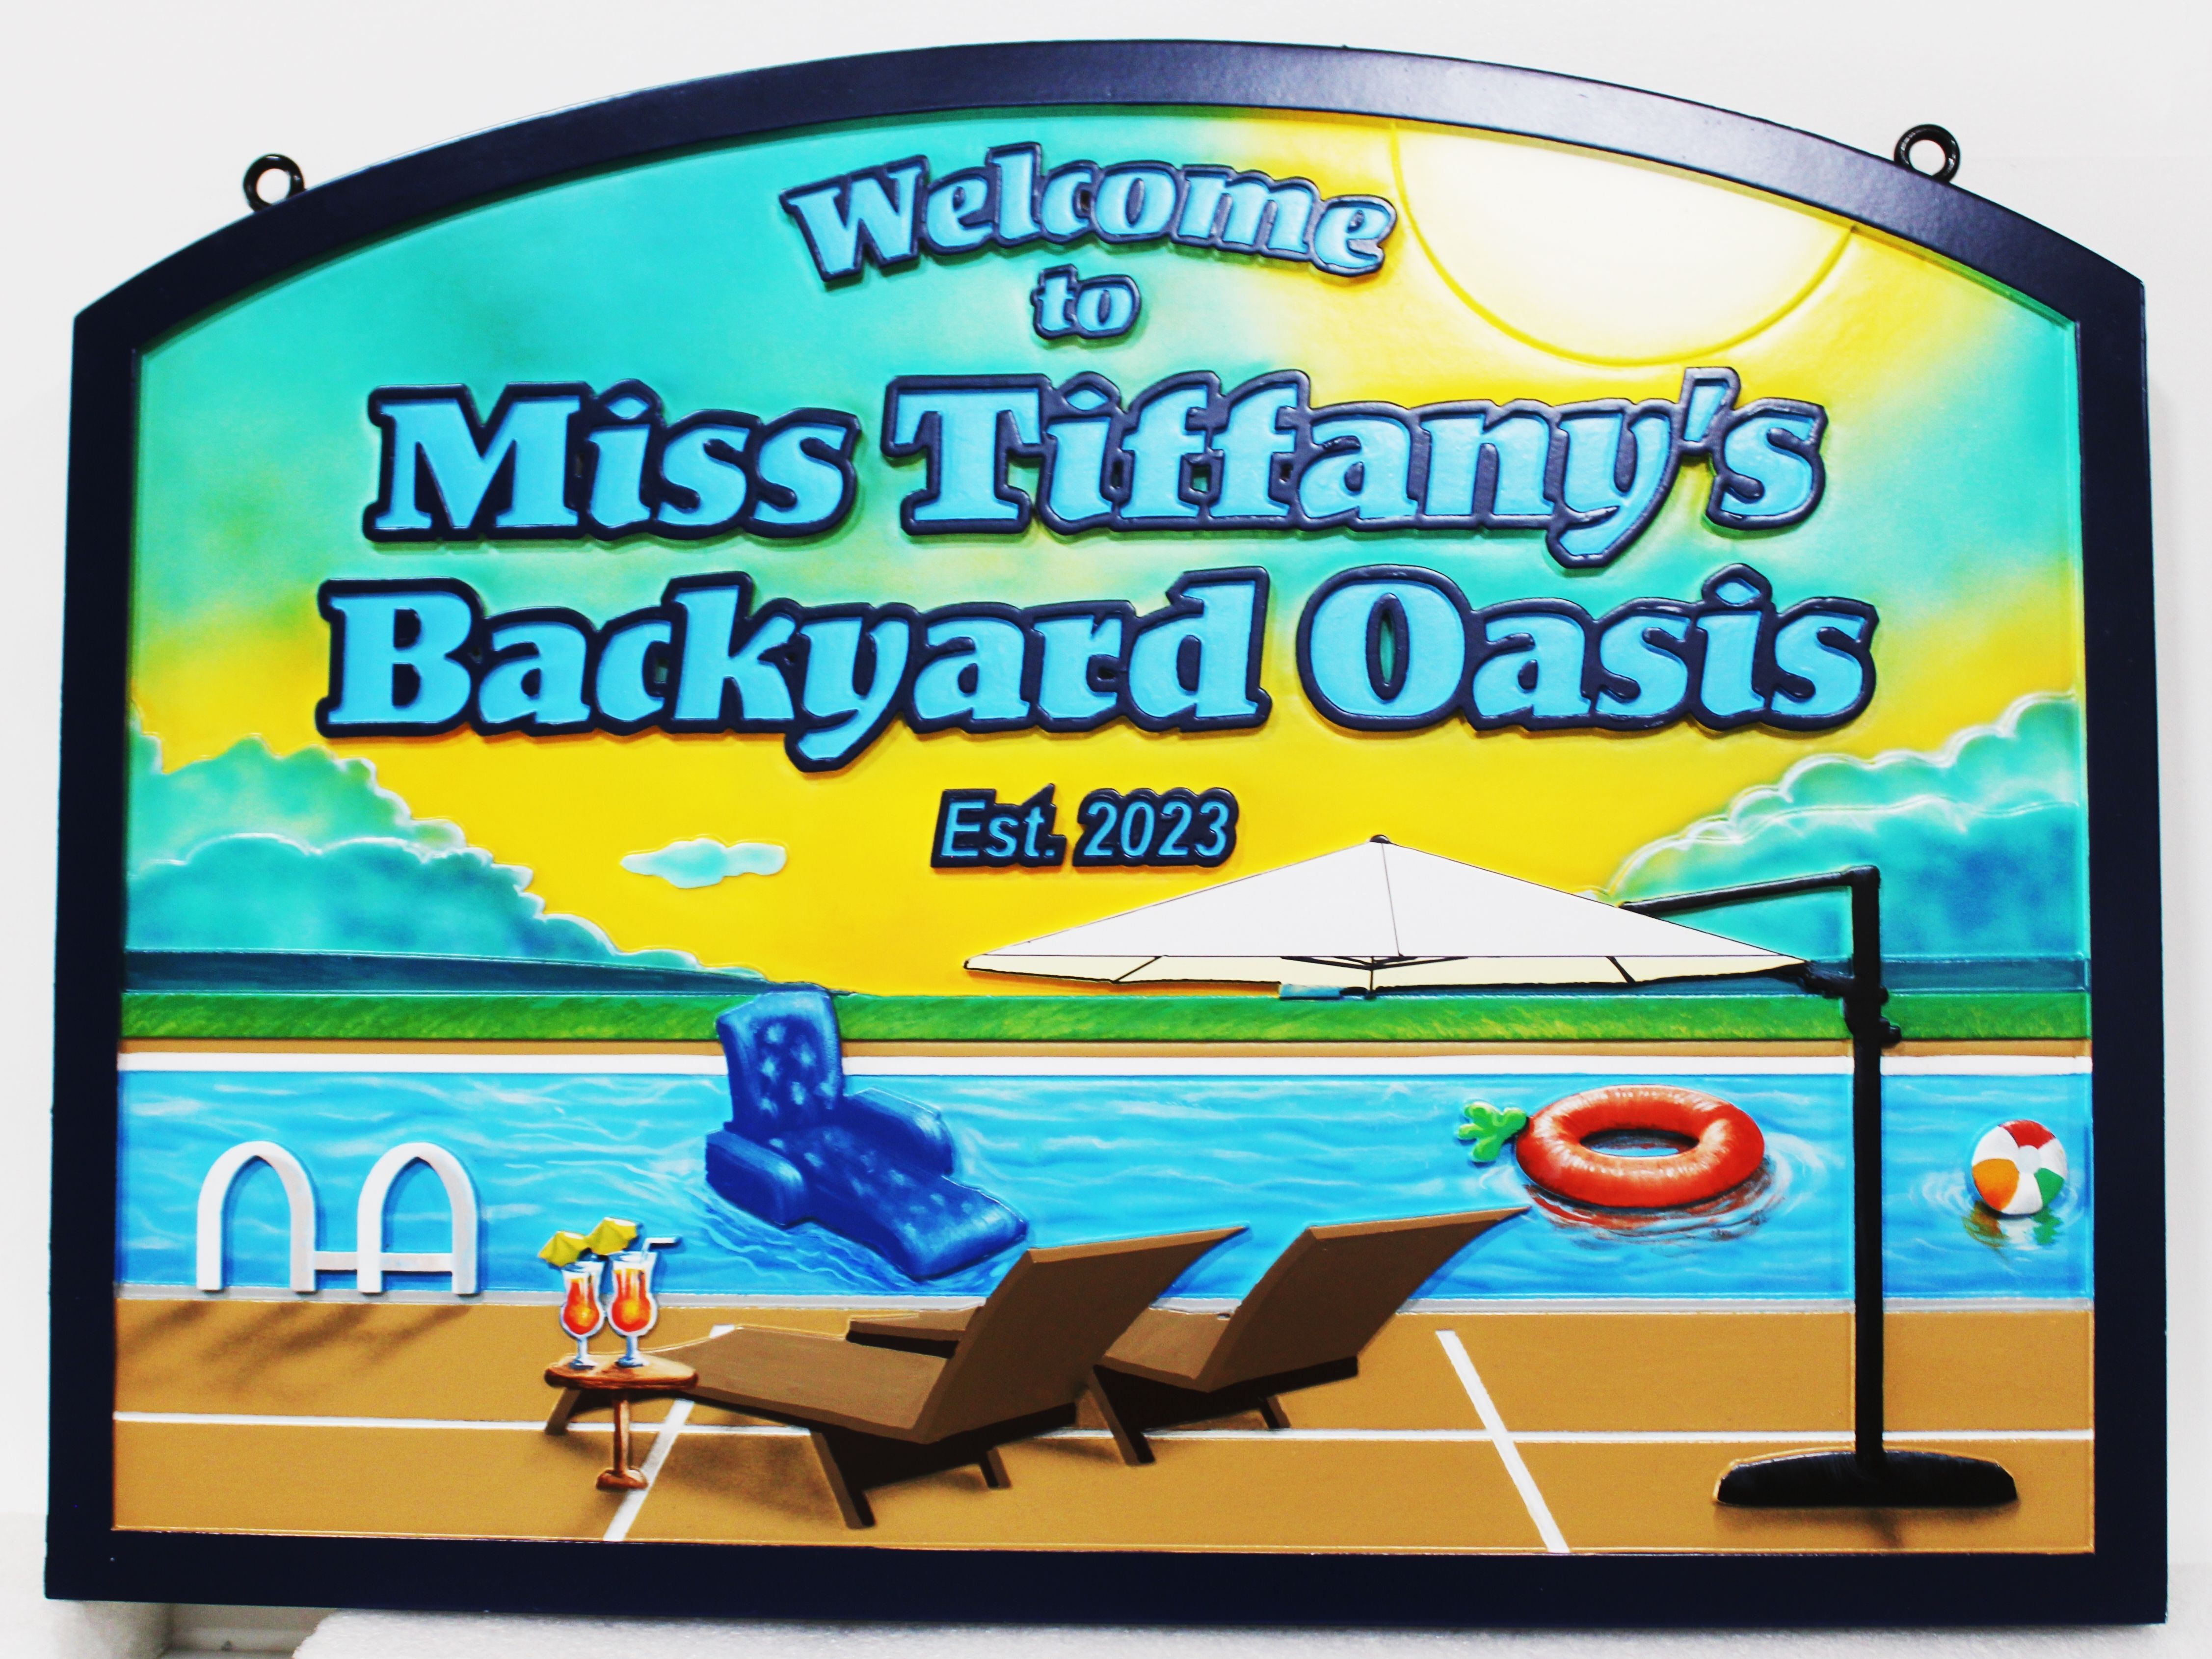 L21086A - Carved 2.5-D Multi-level name sign, "Welcome to Miss Tiffany's Backyard Oasis",